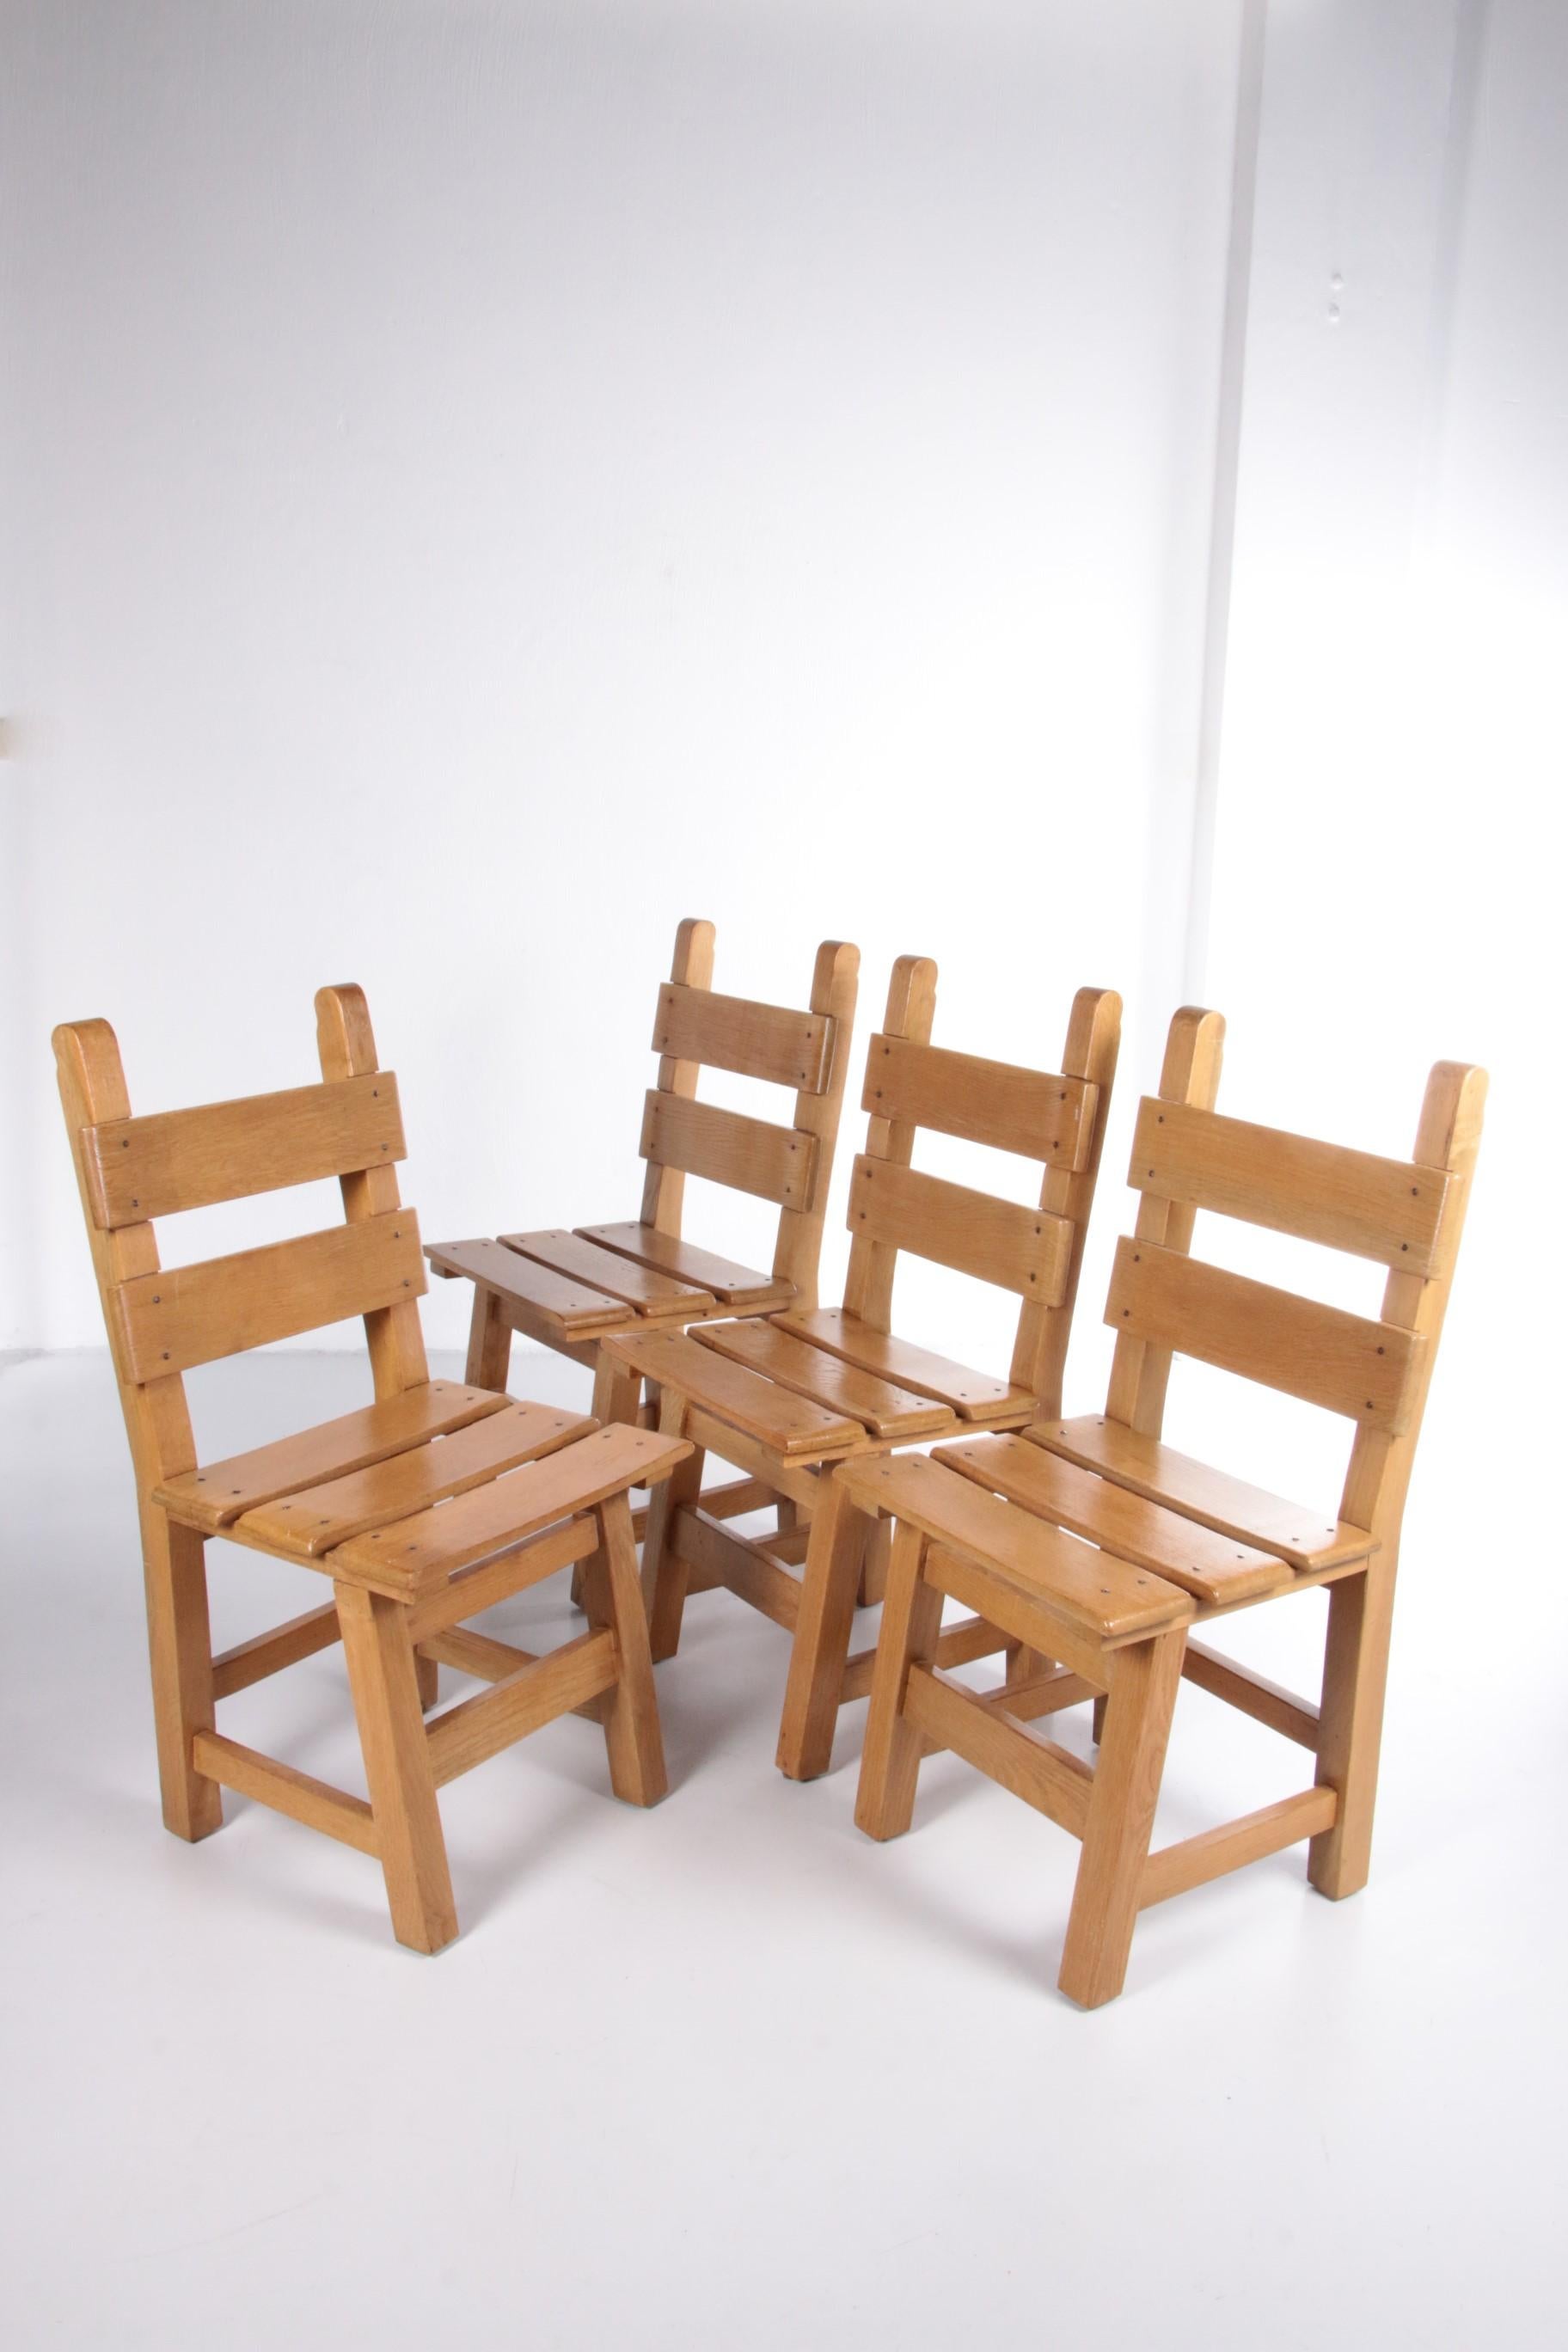 Brutalistic set of 4 sturdy wooden chairs 1980

Organically shaped set of four Spanish dining room chairs from the sixties.
The chairs are made of solid oak.
Both the seat and the backrest are made of solid light, straight oak.
Because the chairs